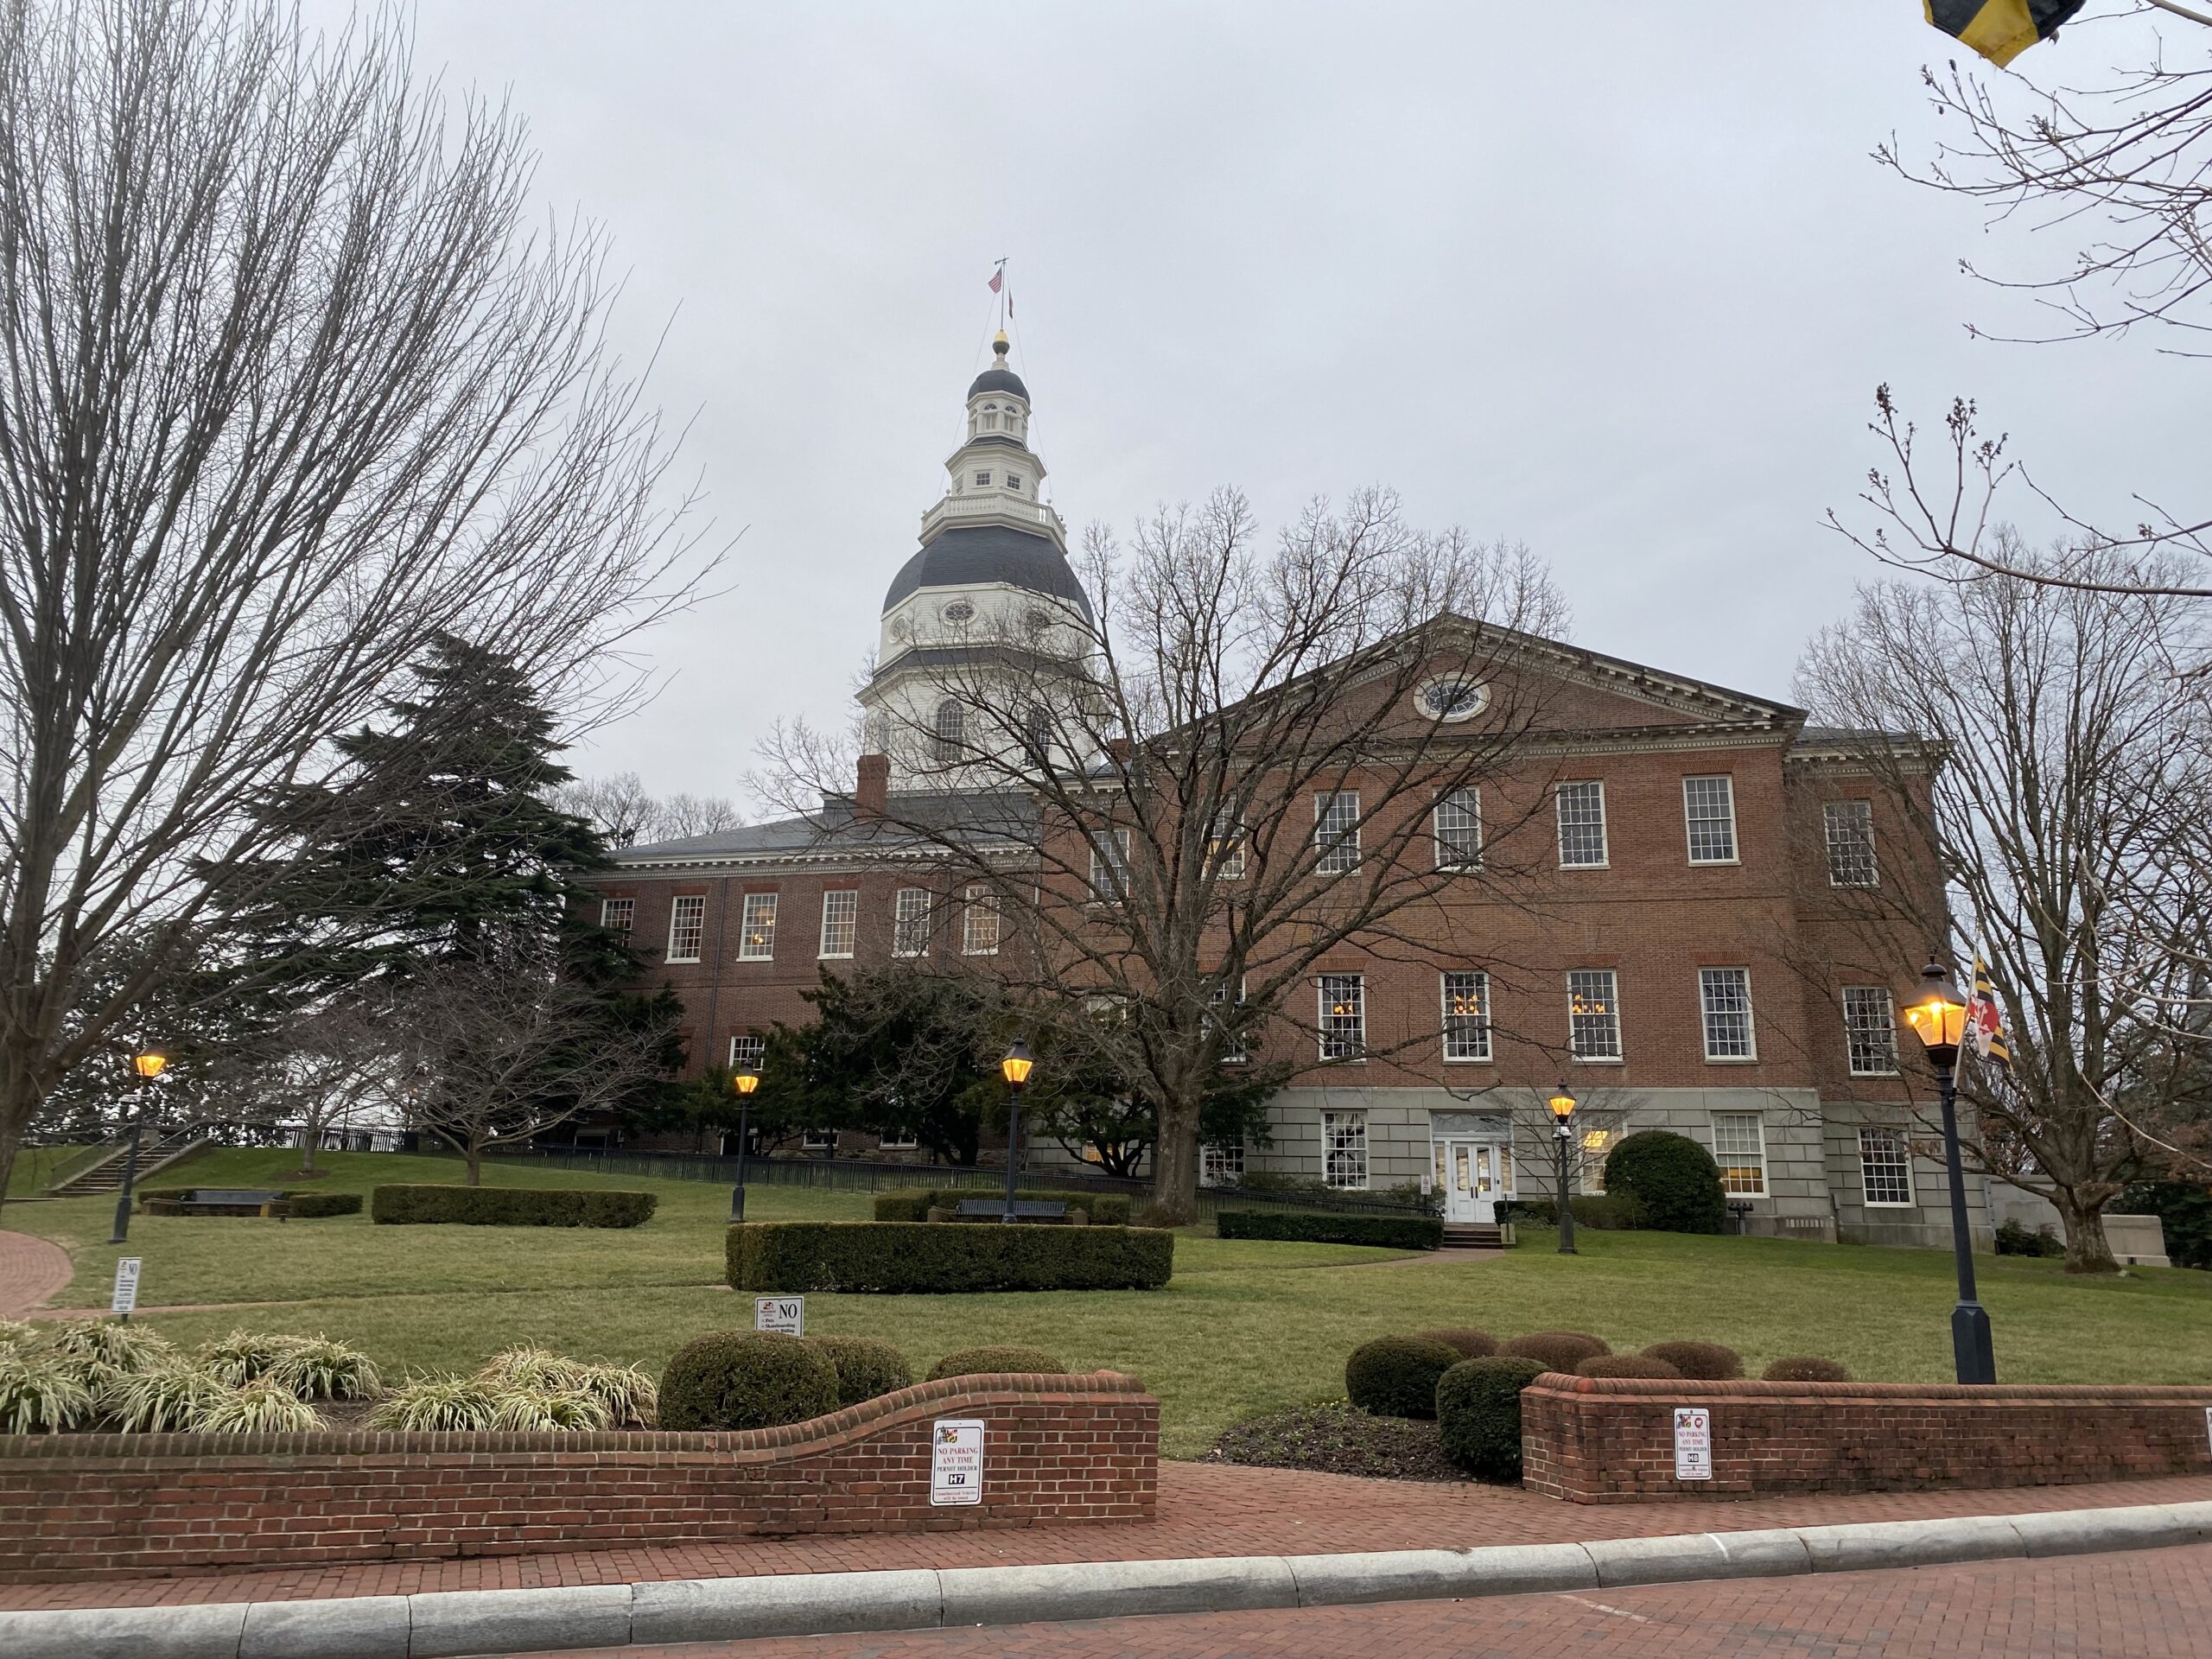 Afternoon beside the Maryland statehouse.